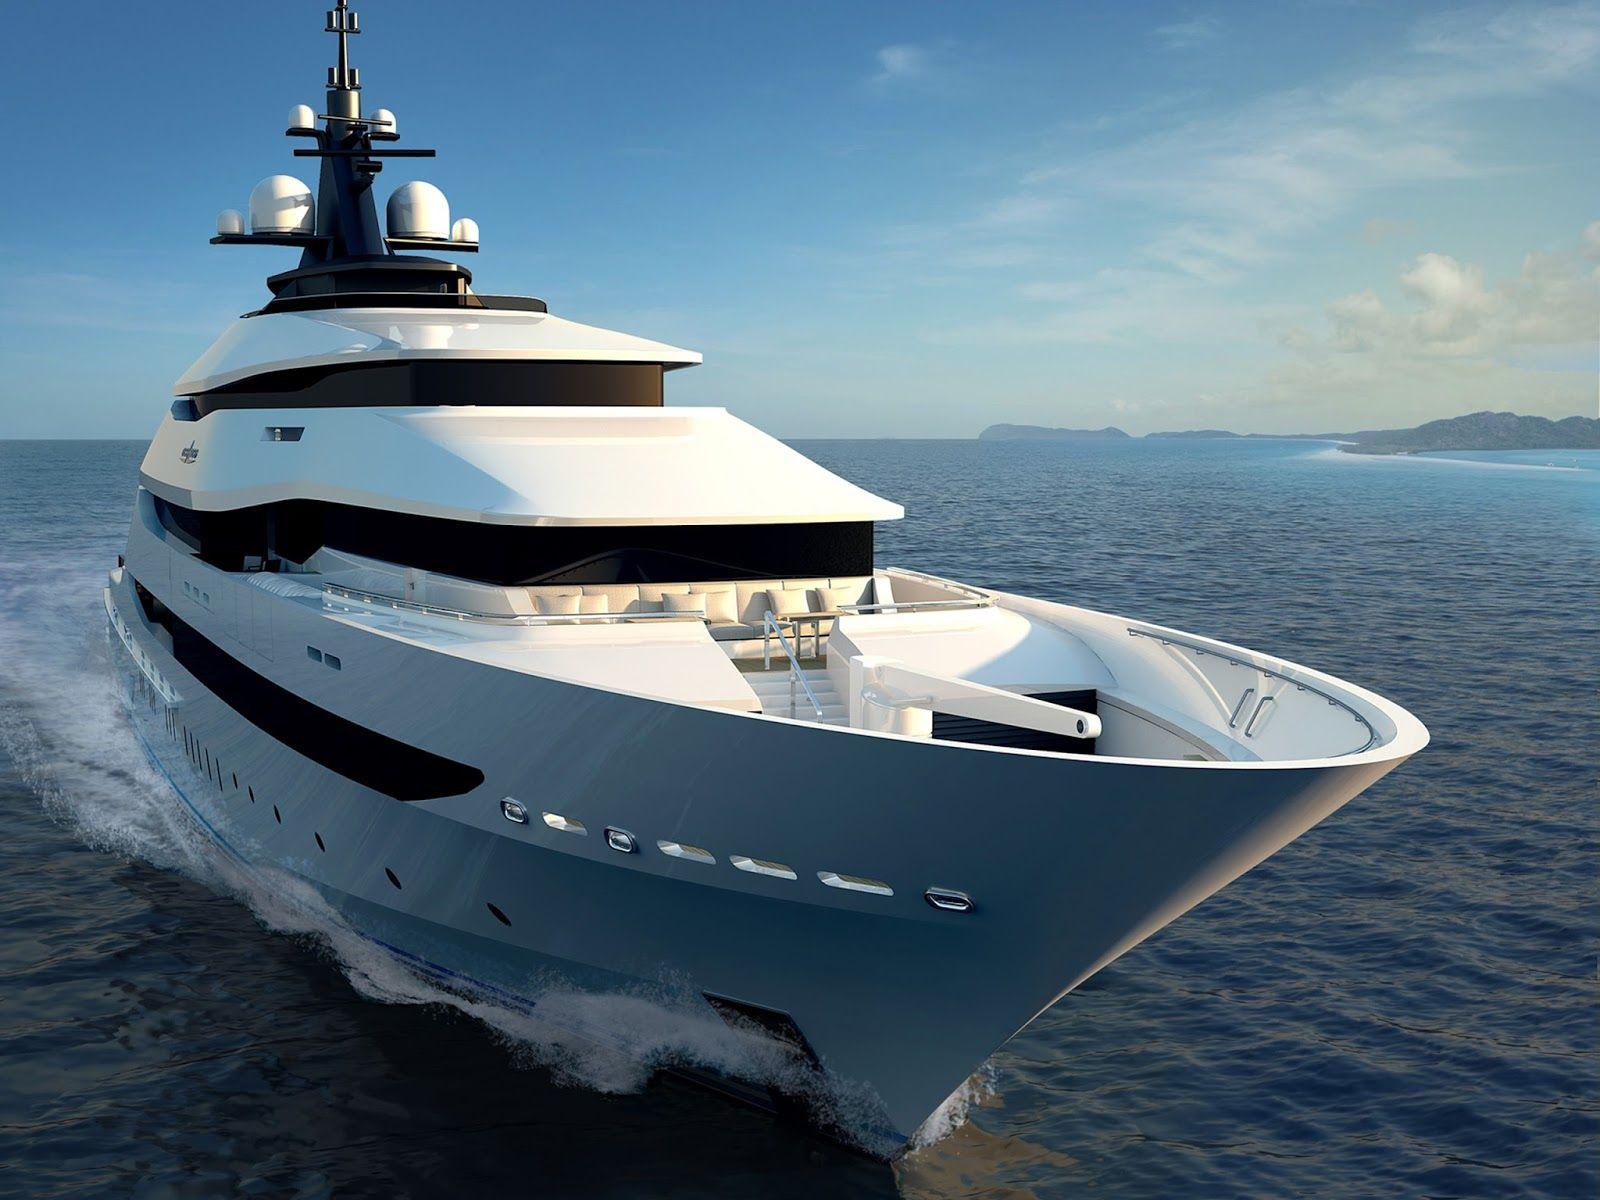 Yacht Picture, Luxury Private Yachts: Mega Yacht Full HD Desktop